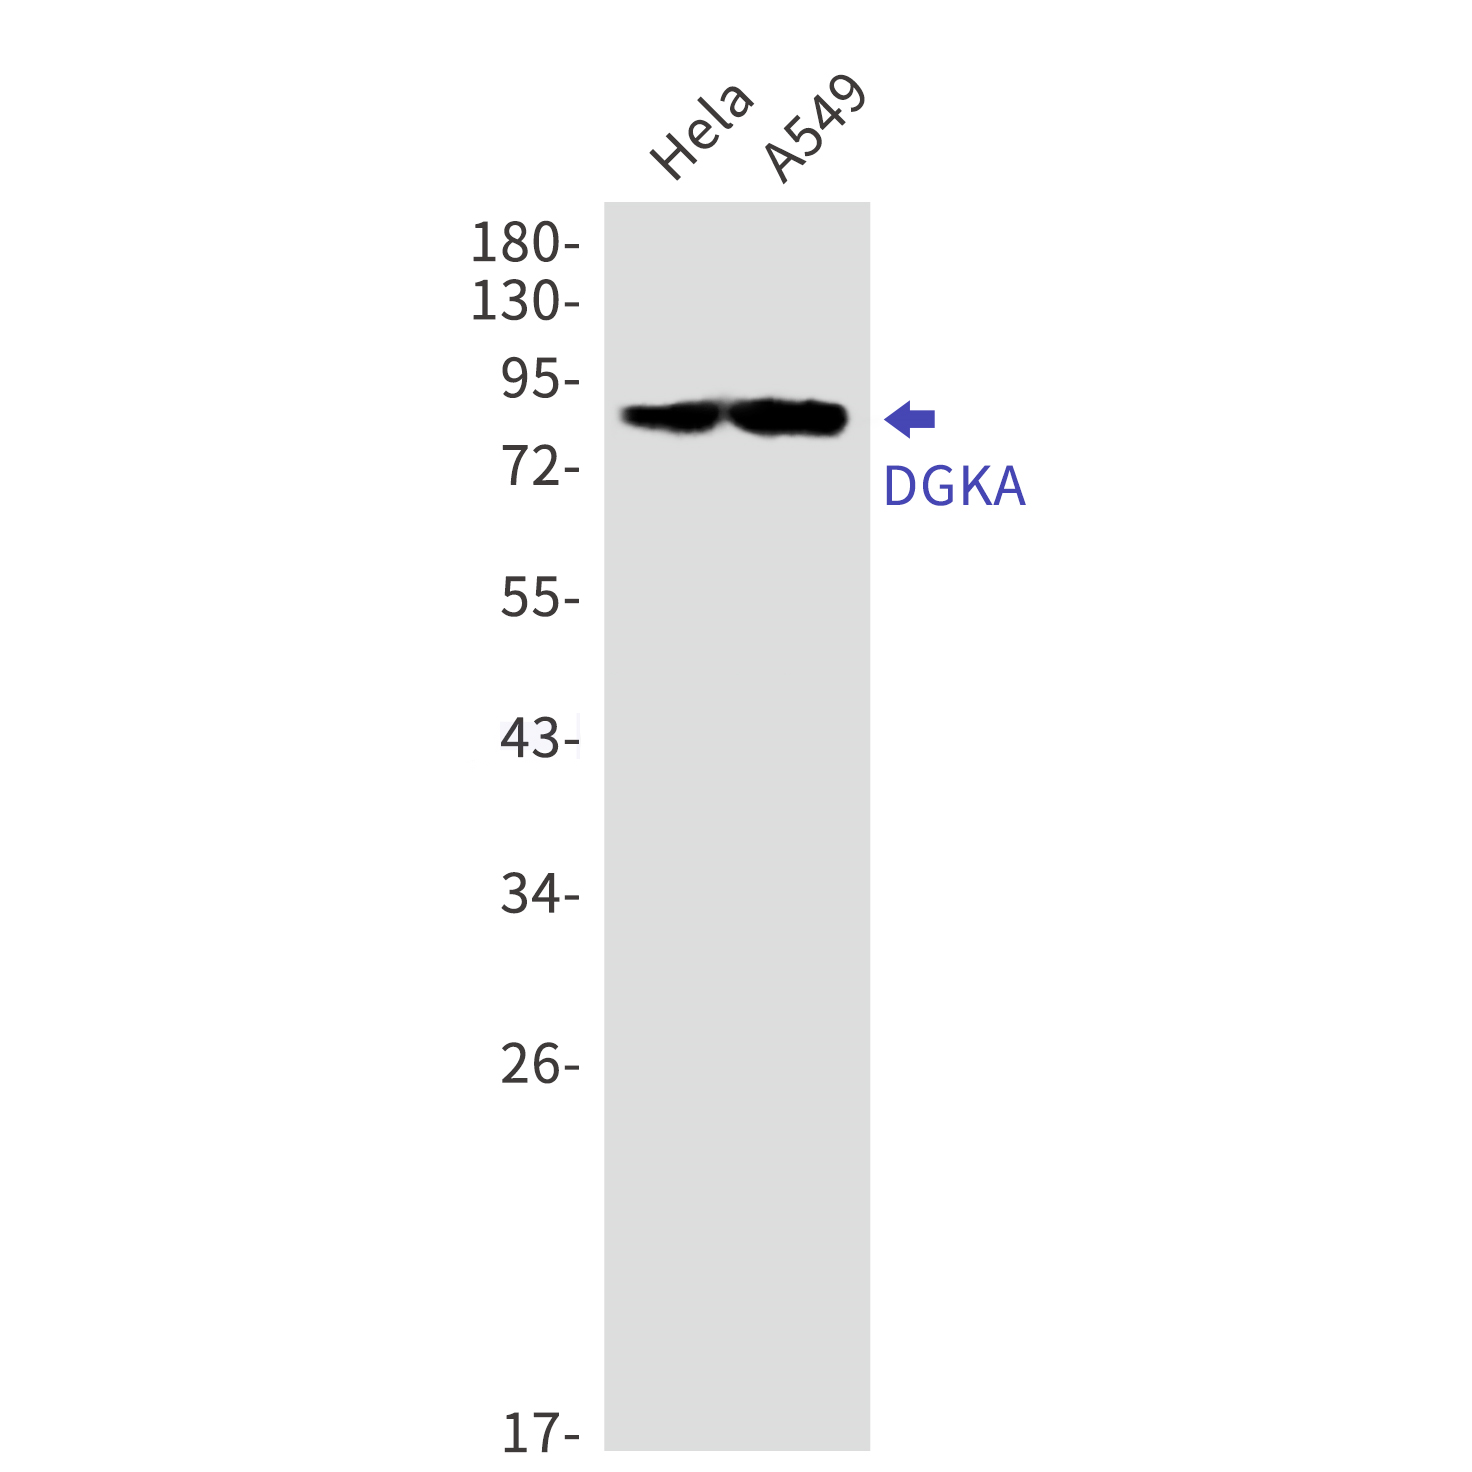 Western blot detection of DGKA in Hela,A549 cell lysates using DGKA Rabbit mAb(1:1000 diluted).Predicted band size:83kDa.Observed band size:83kDa.